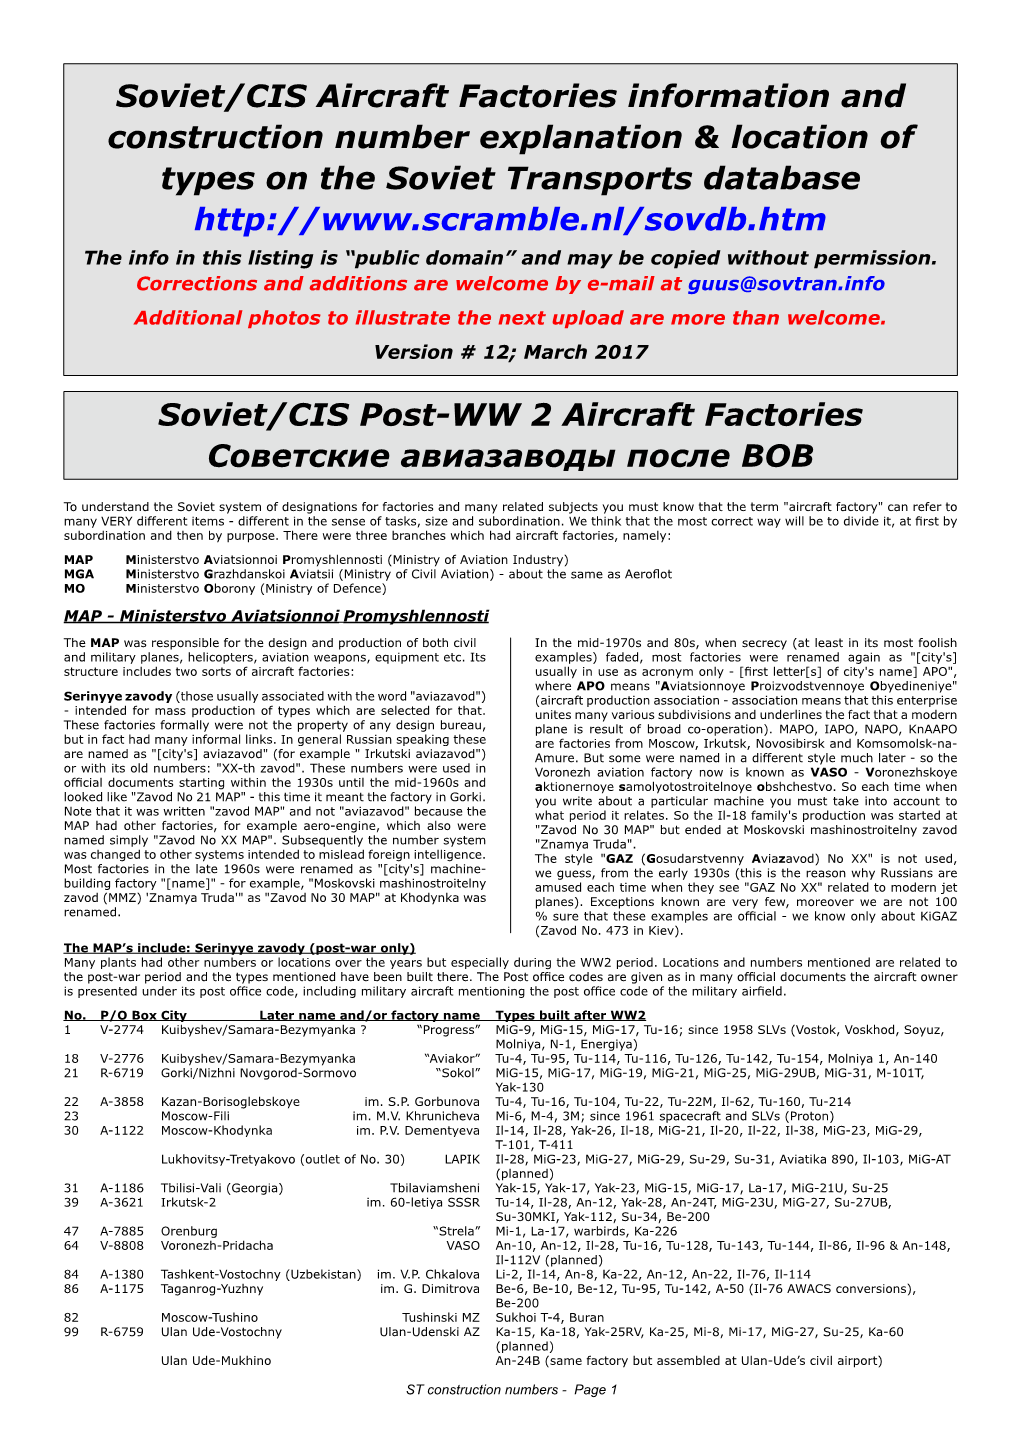 Soviet/CIS Aircraft Factories Information and Construction